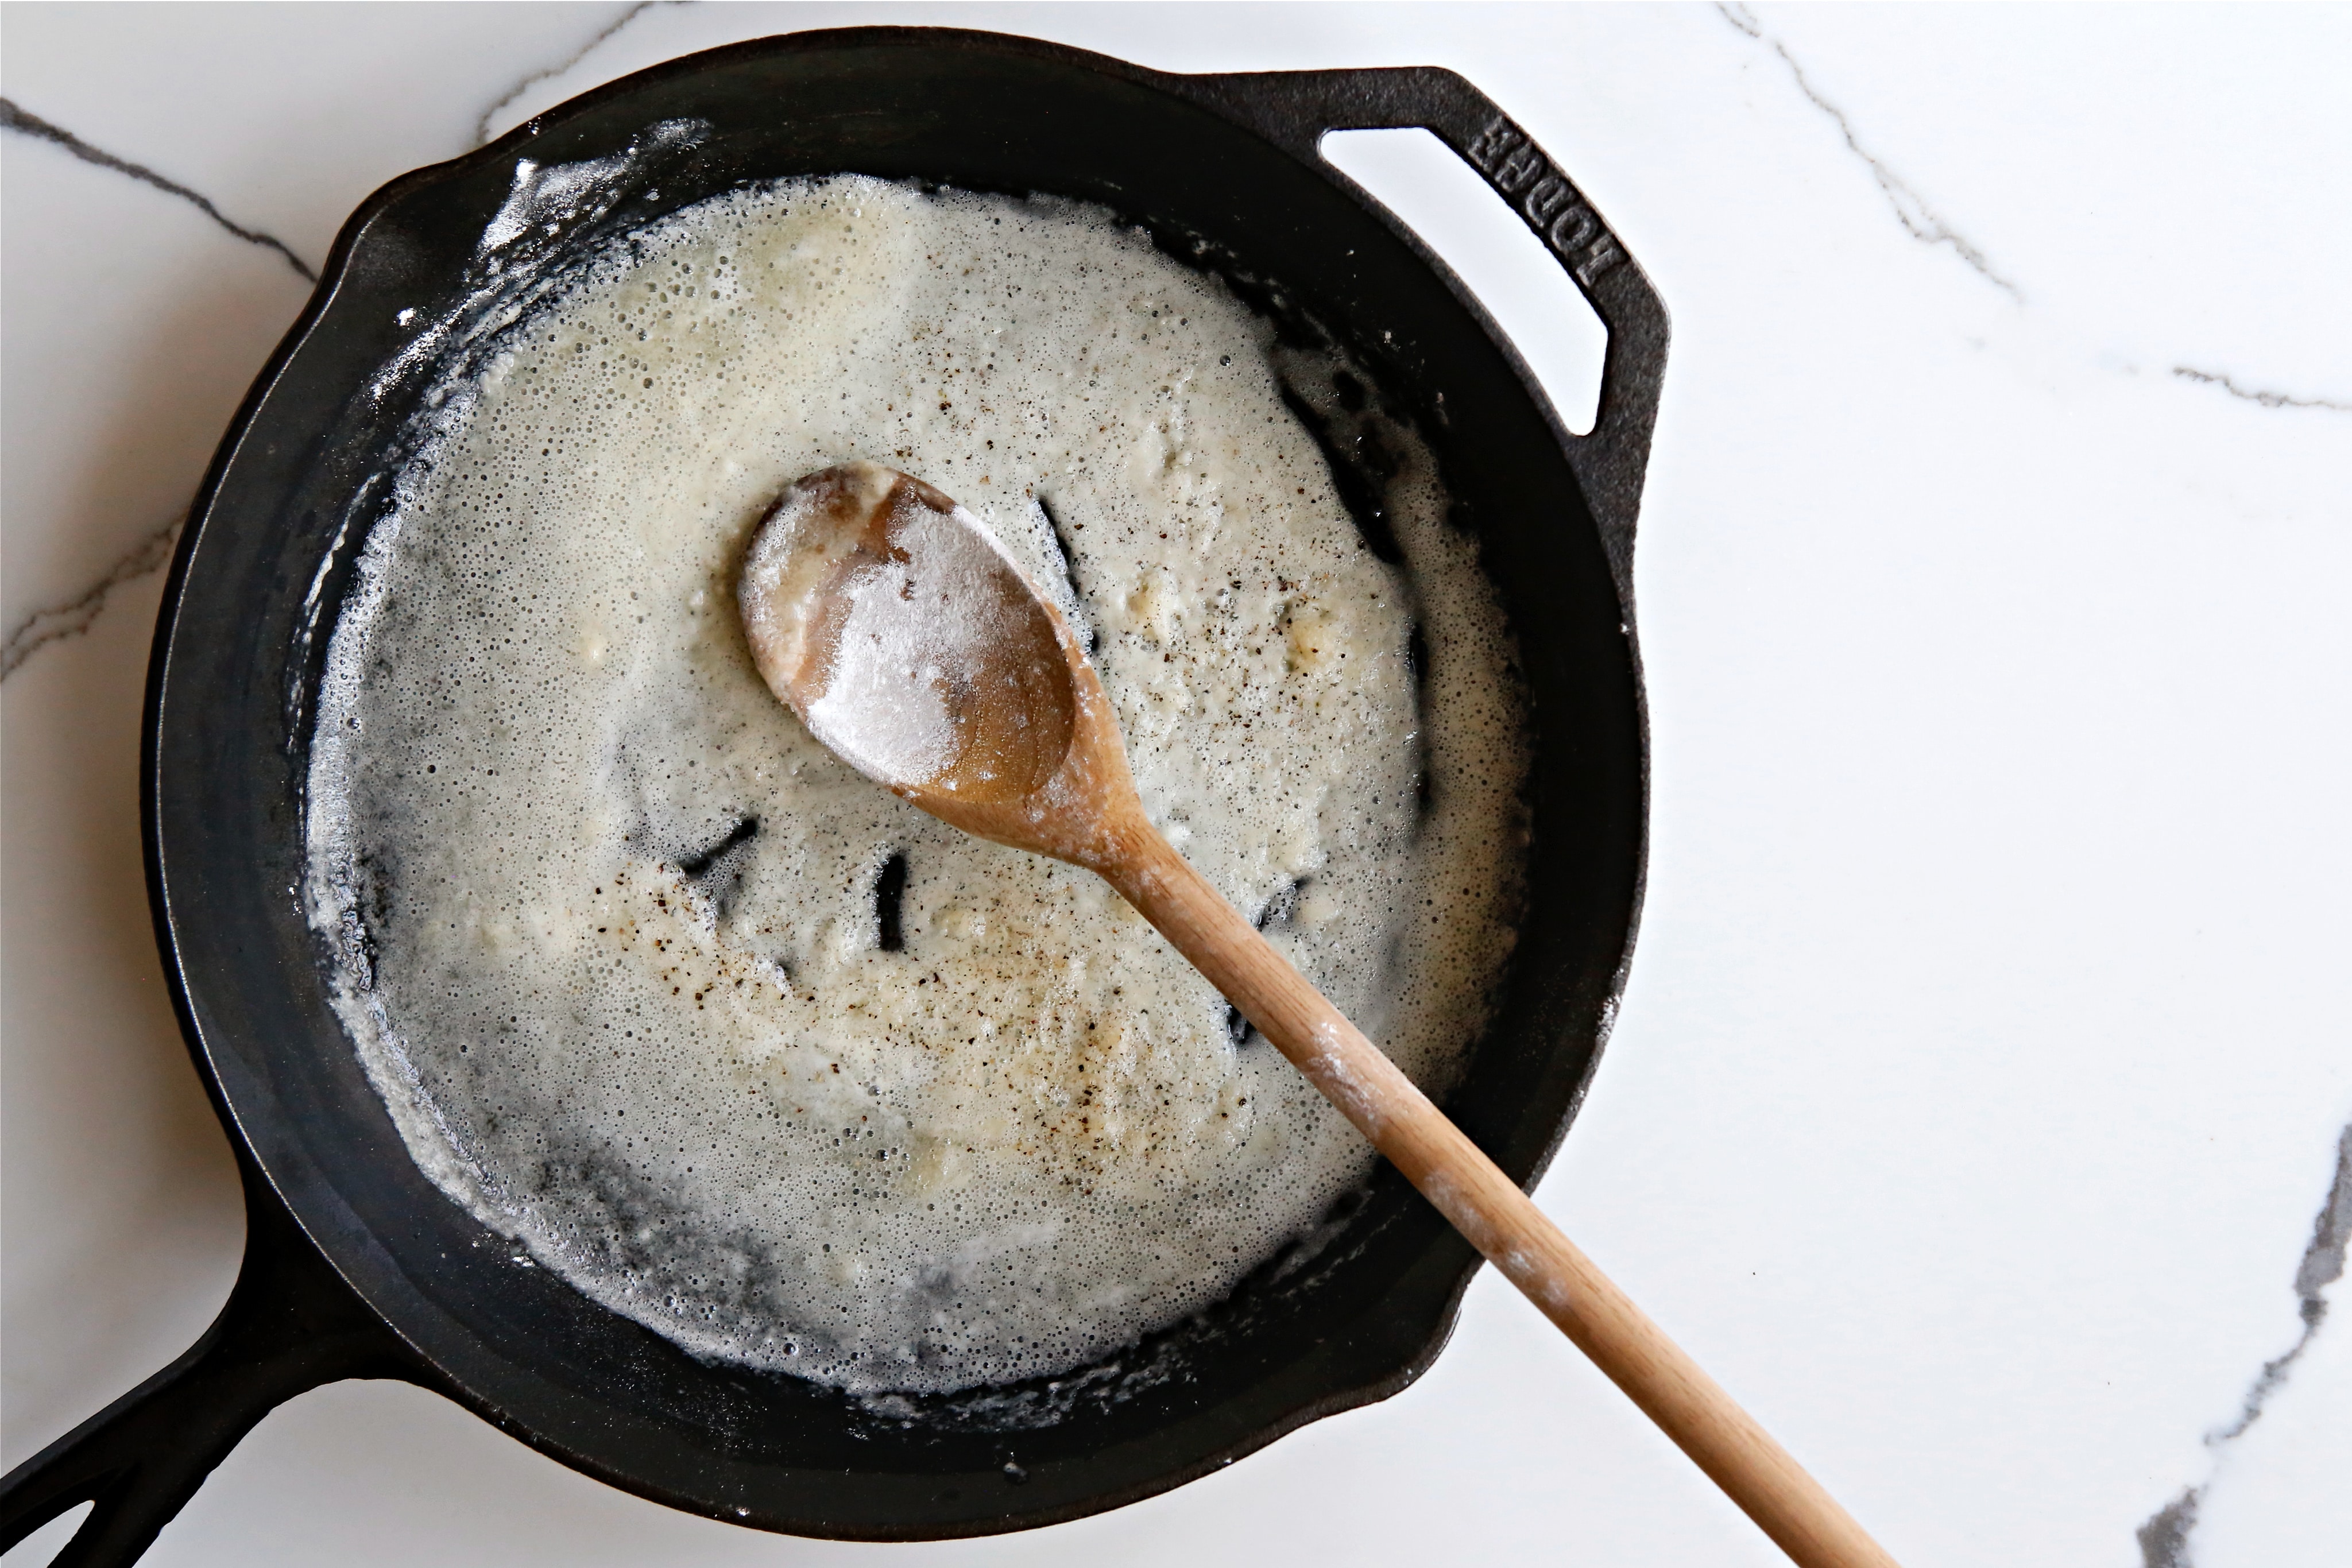 Melted butter and flour combined in a cast iron skillet